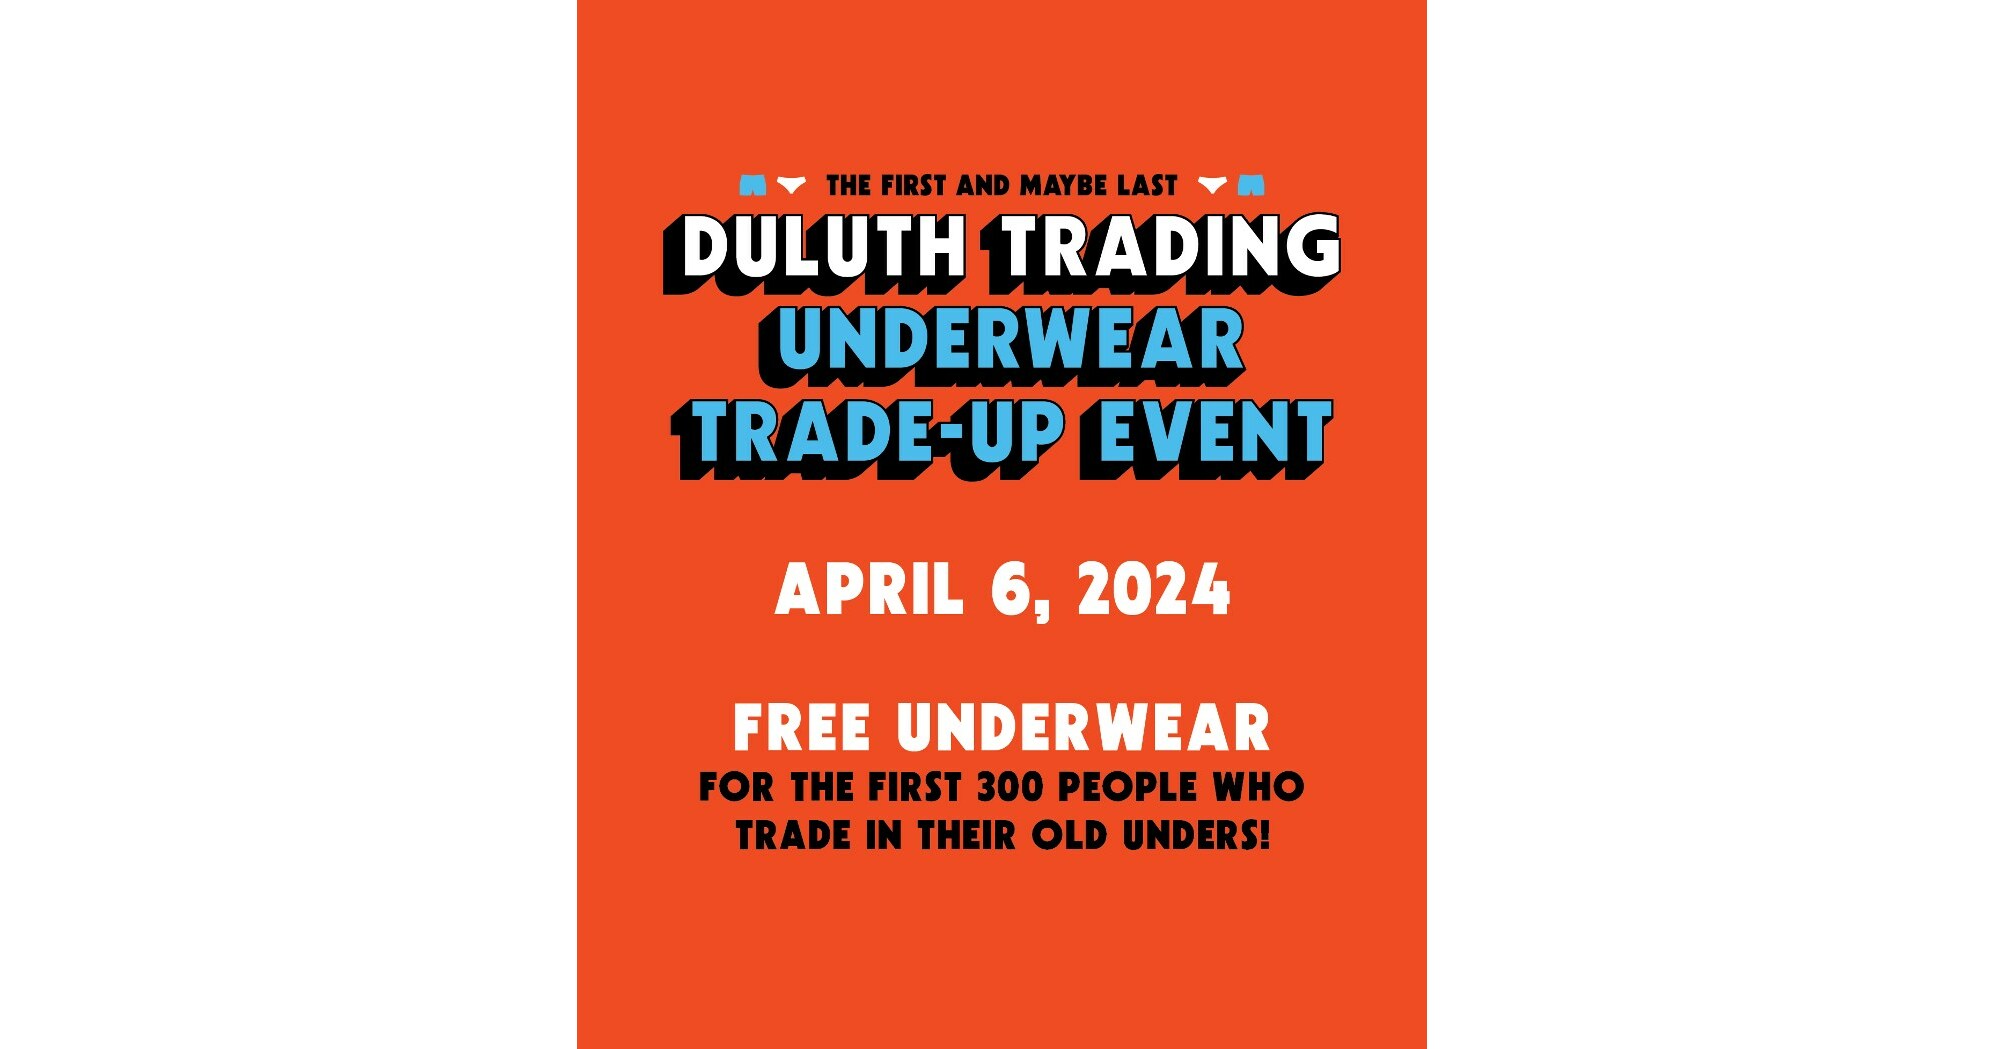 LAST DAY - ALL Unders ON SALE! - Duluth Trading Company